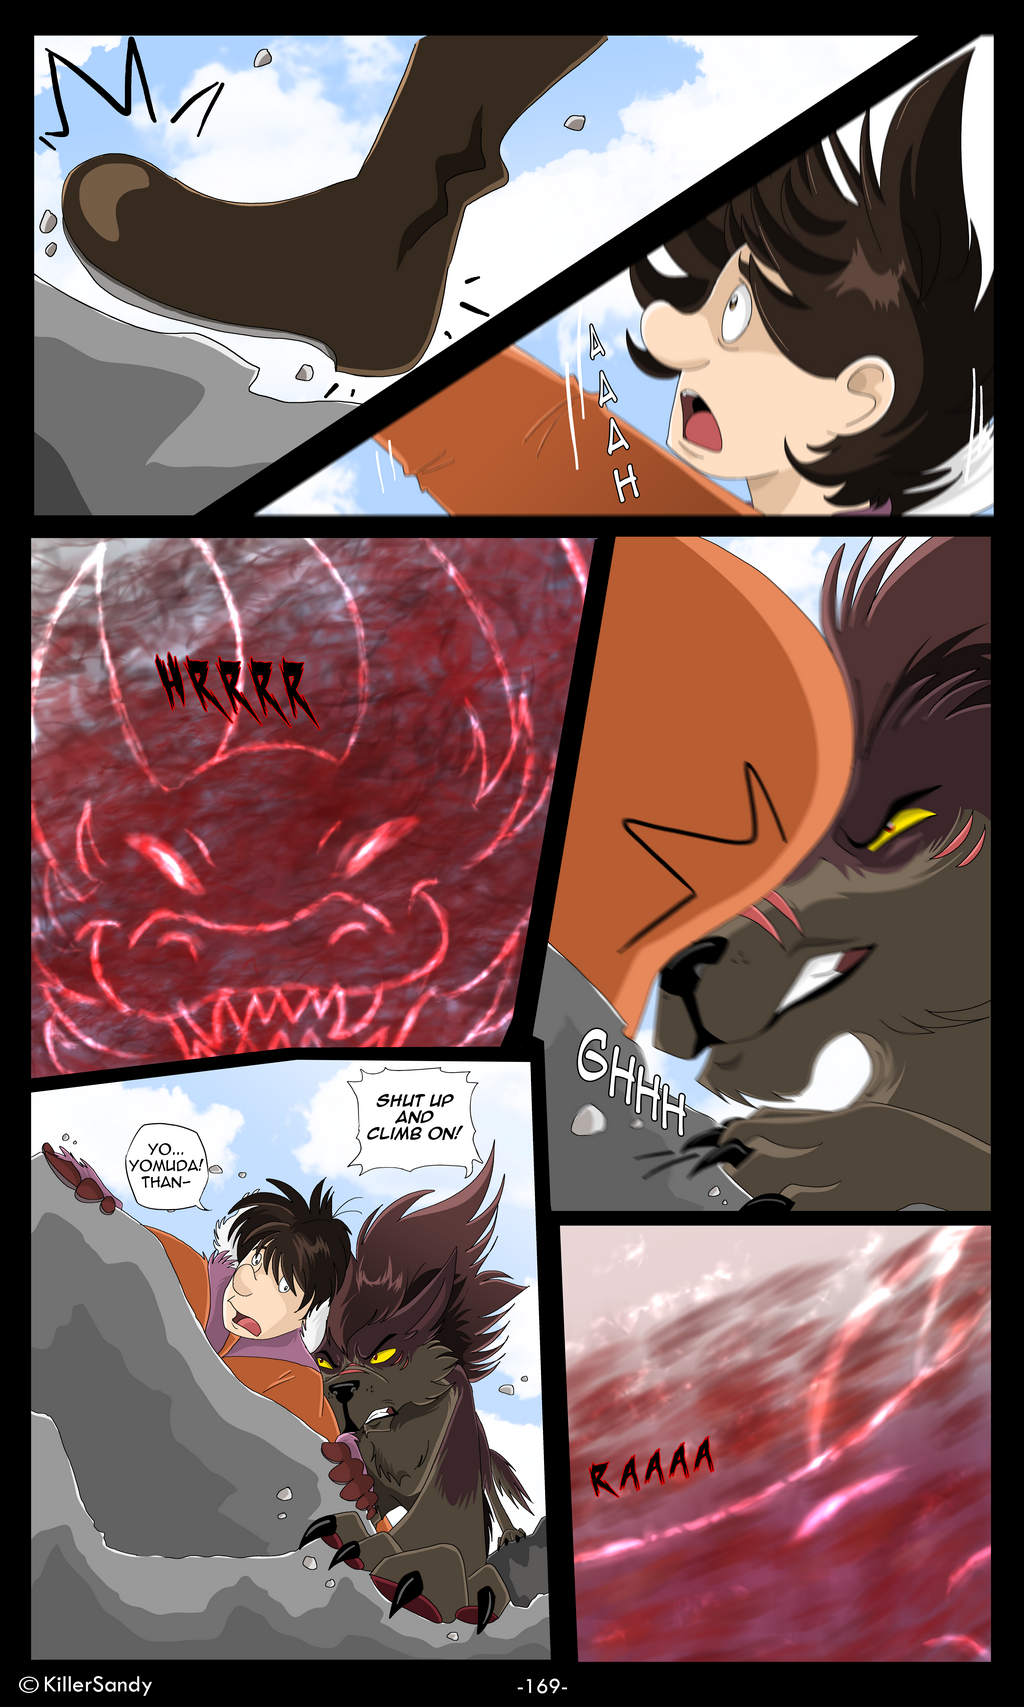 The Prince of the Moonlight Stone page 169